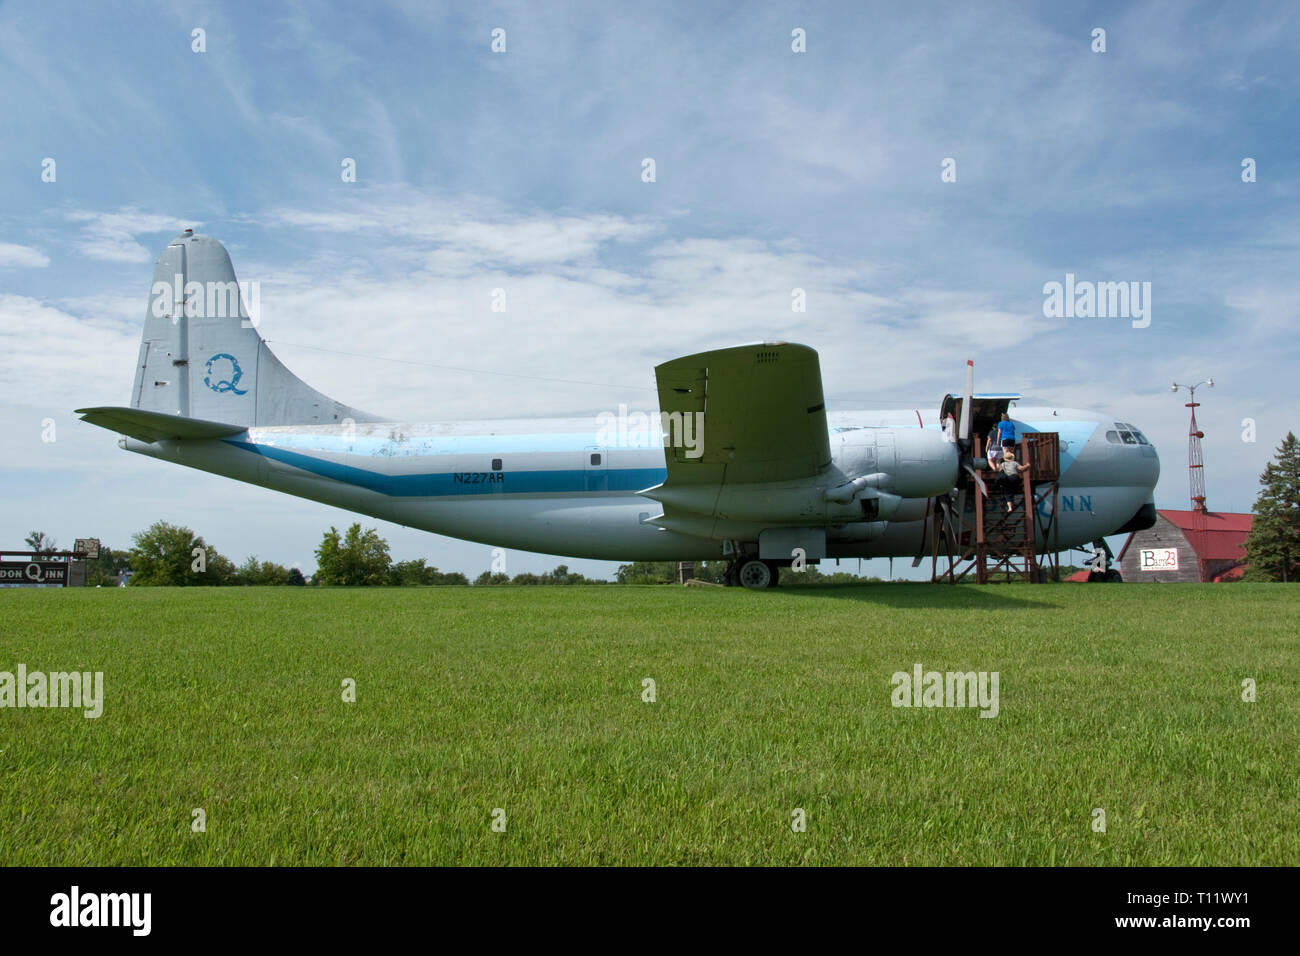 A Boeing C-97 Stratofreighter cargo airplane was landed outside the Don Q Inn as a tourist attraction near Dodgeville, Wisconsin. Stock Photo